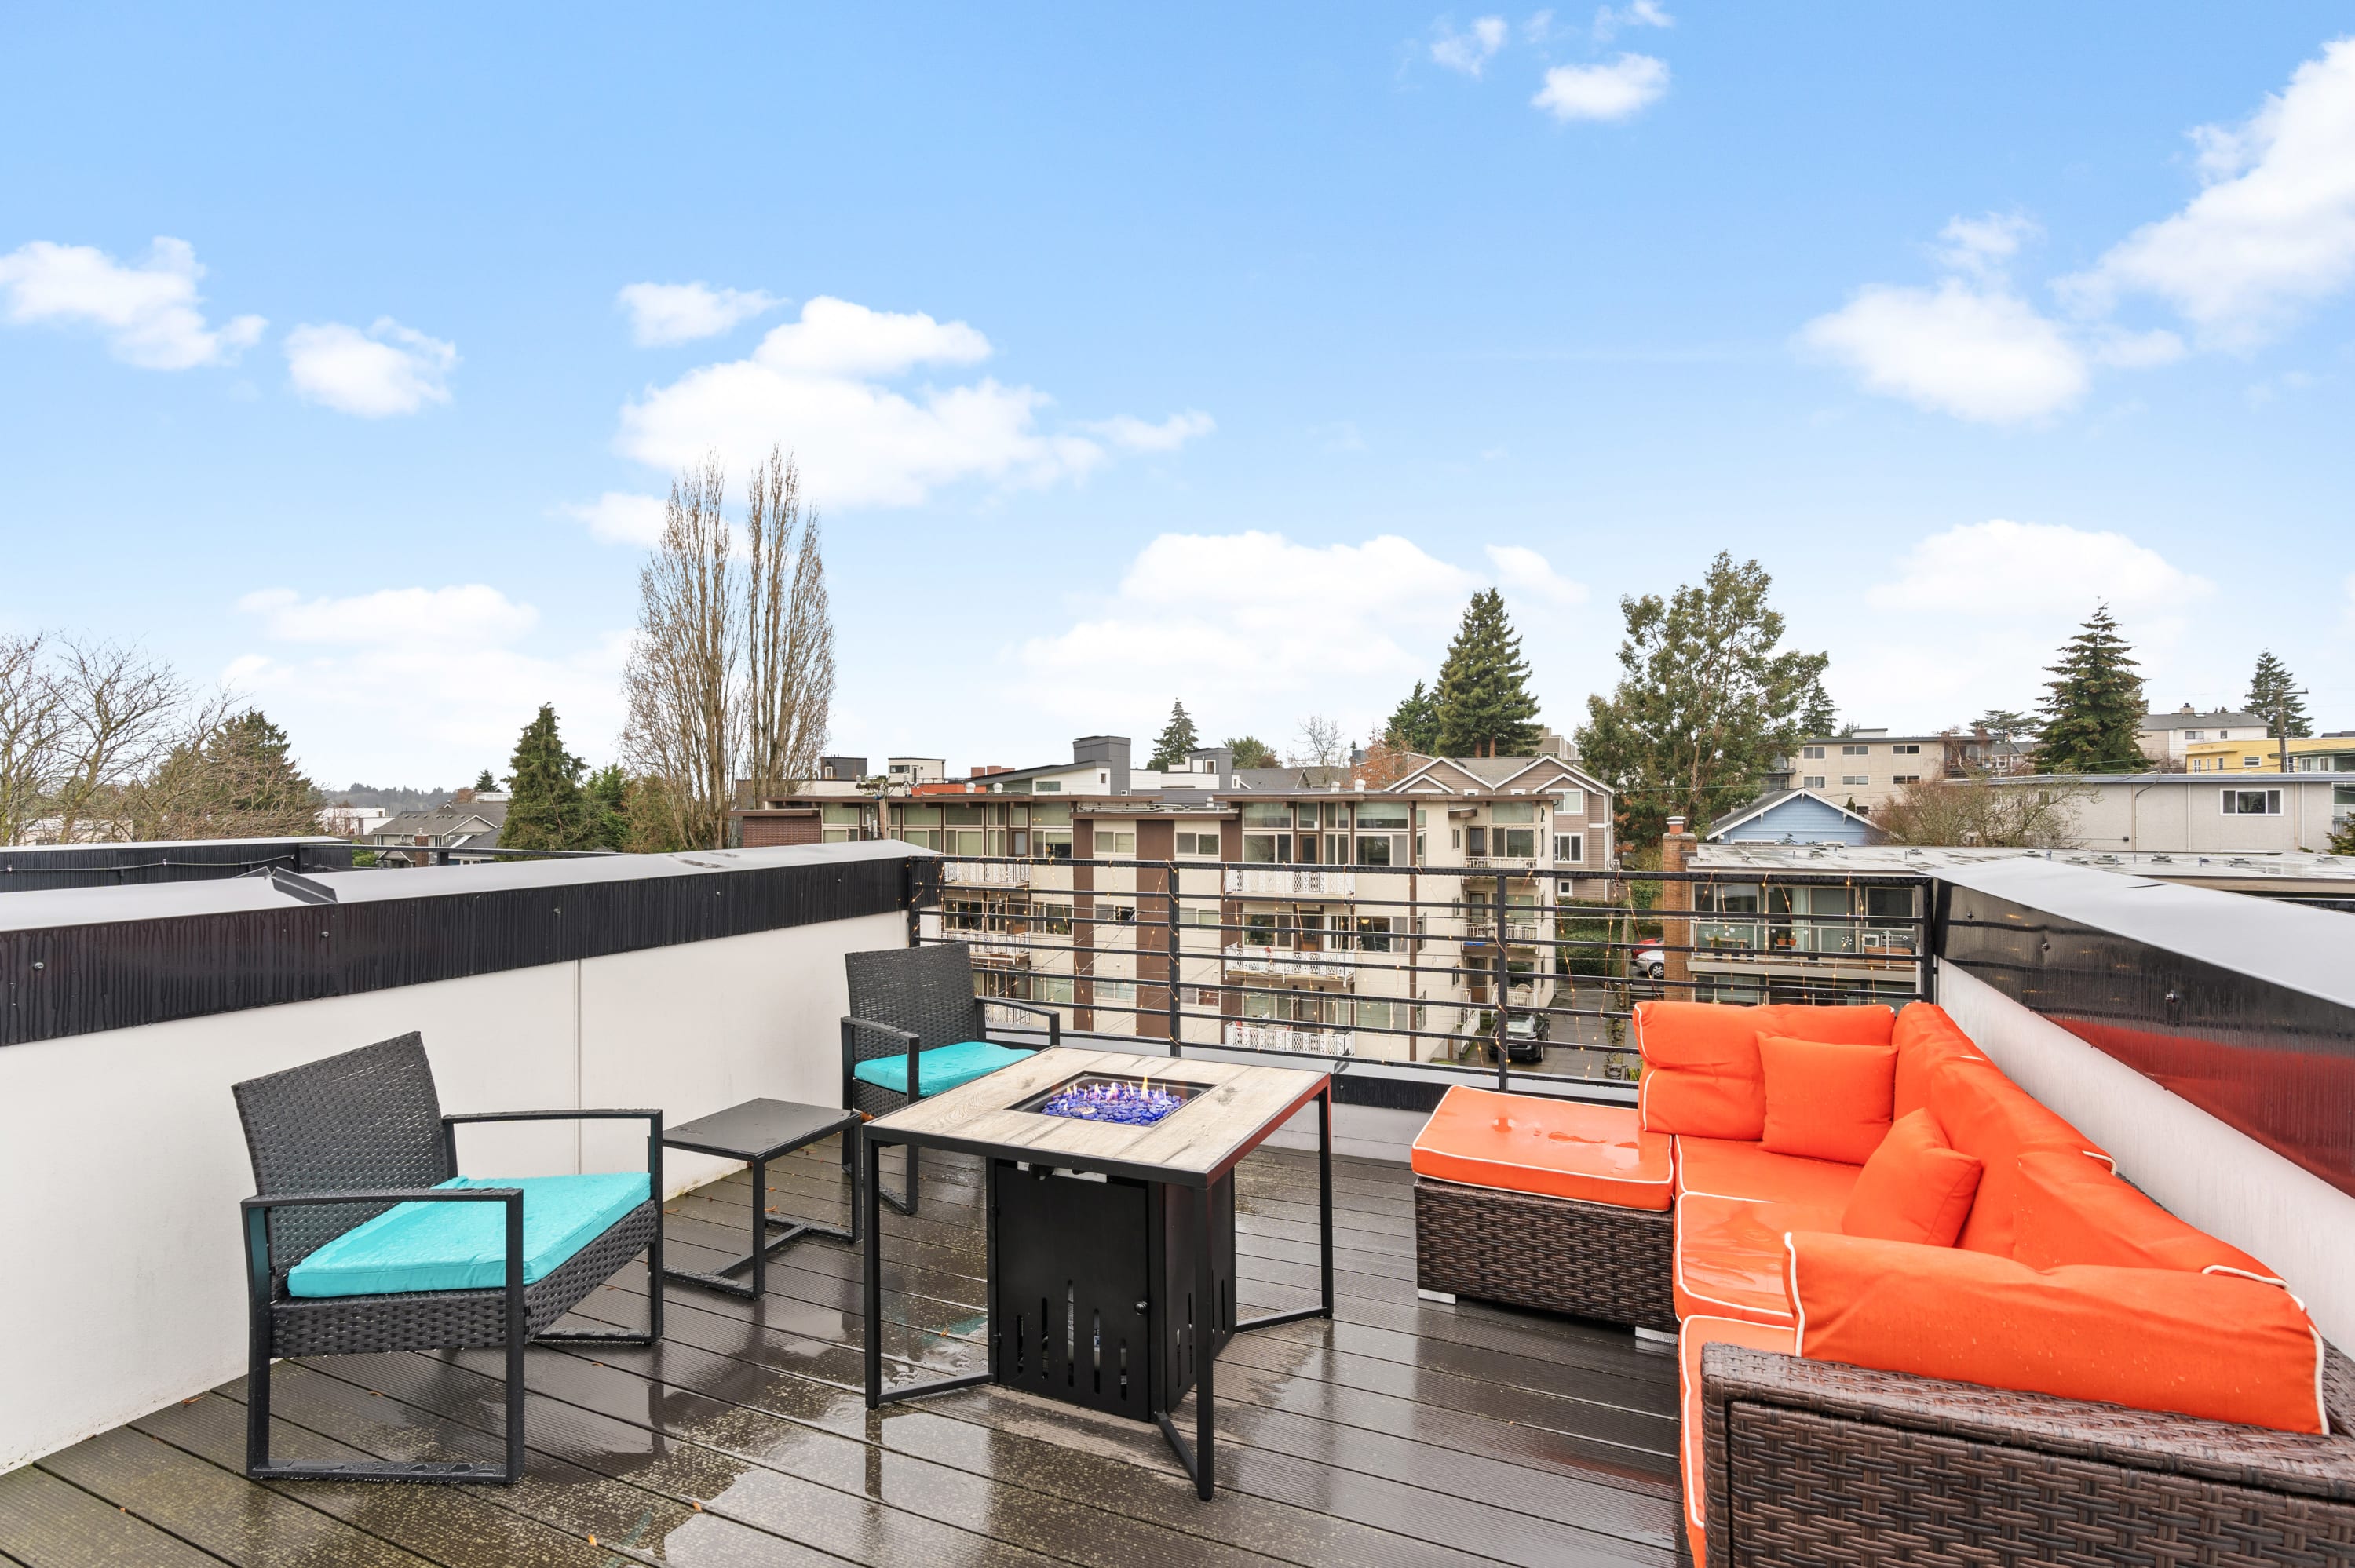 Fire pit and comfy furniture on the rooftop.